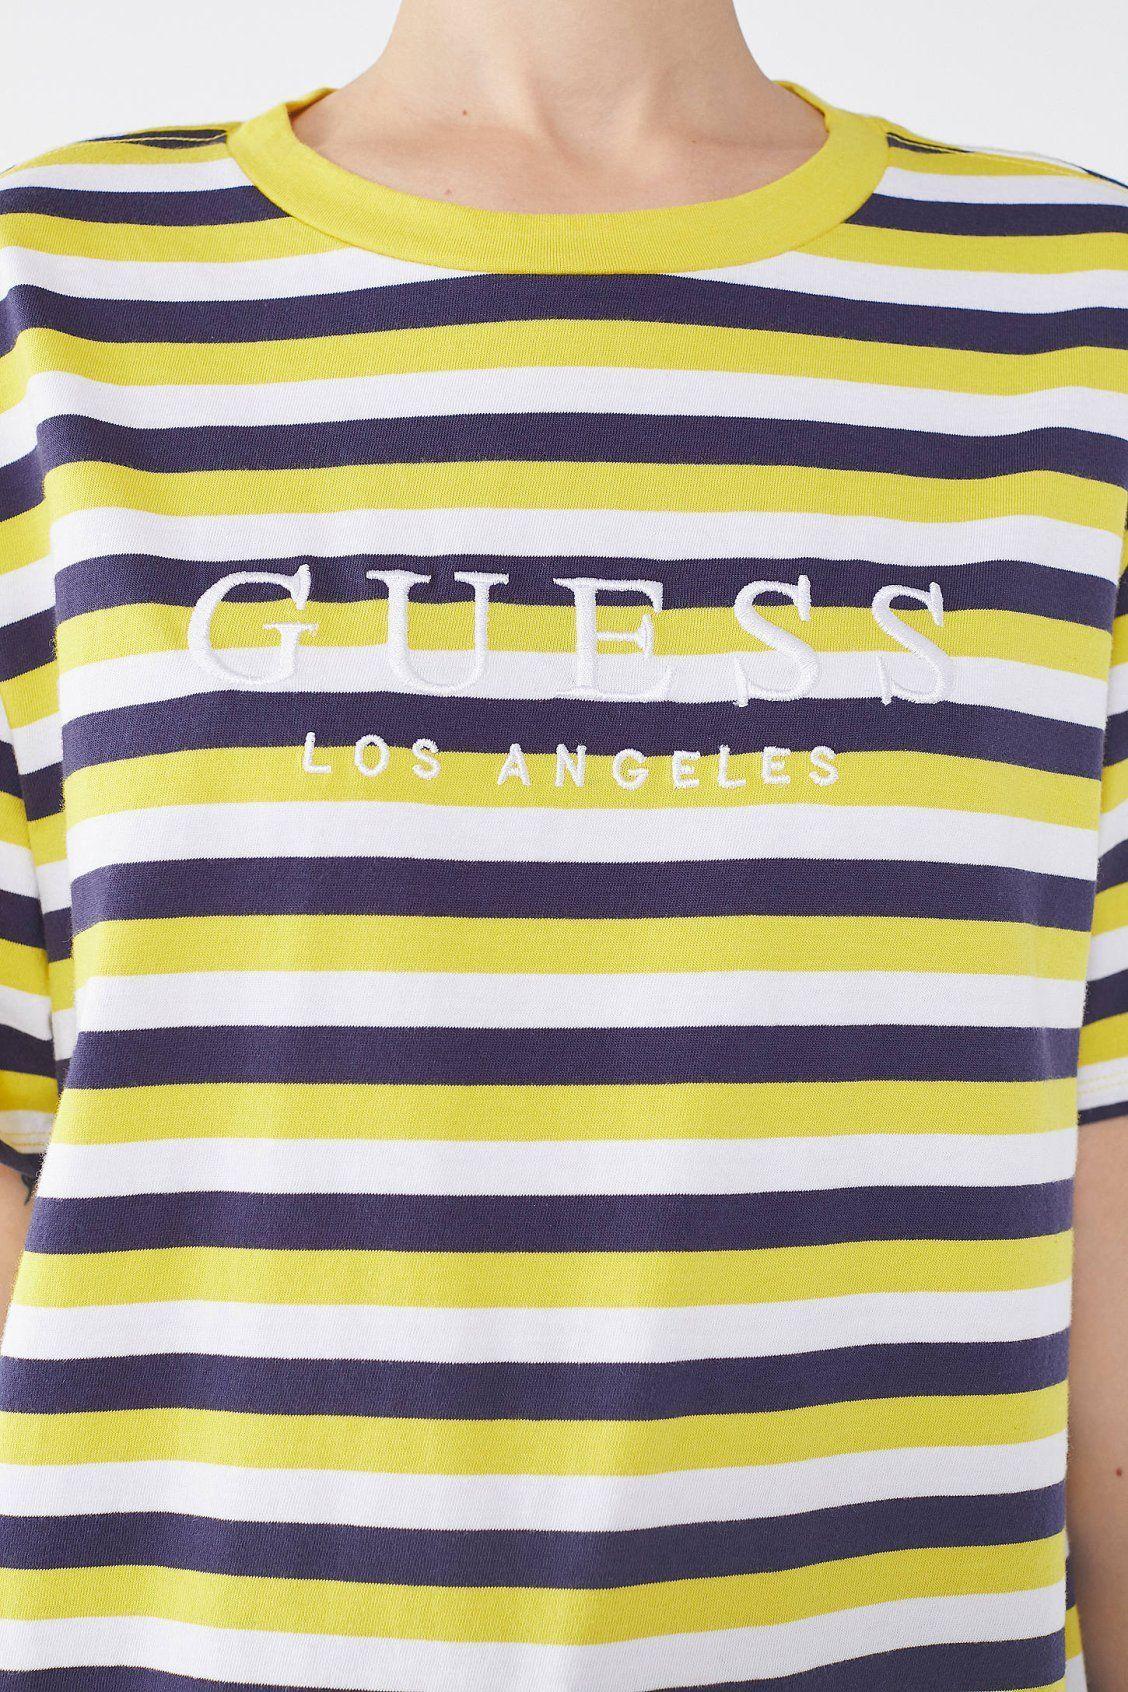 Yellow Striped Logo - GUESS + UO Striped Logo Tee | Tees | Tees, Urban outfitters, Outfits